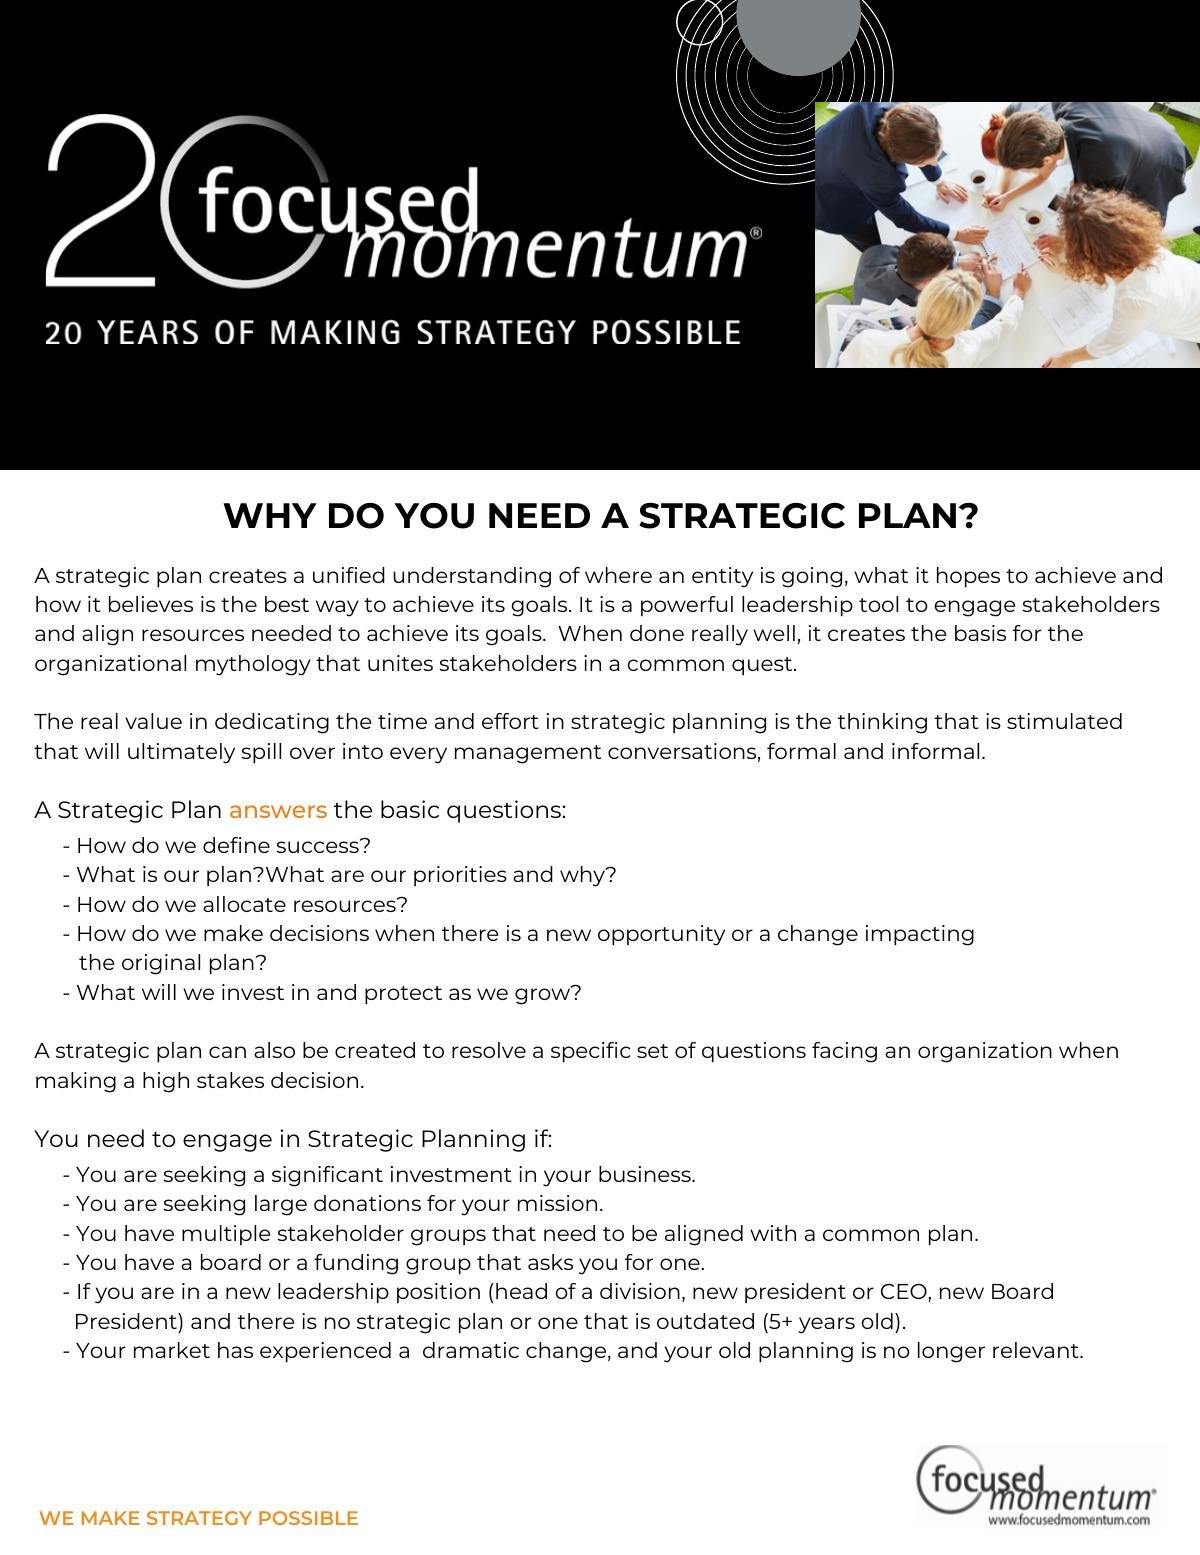 Why do you need a strategic plan?